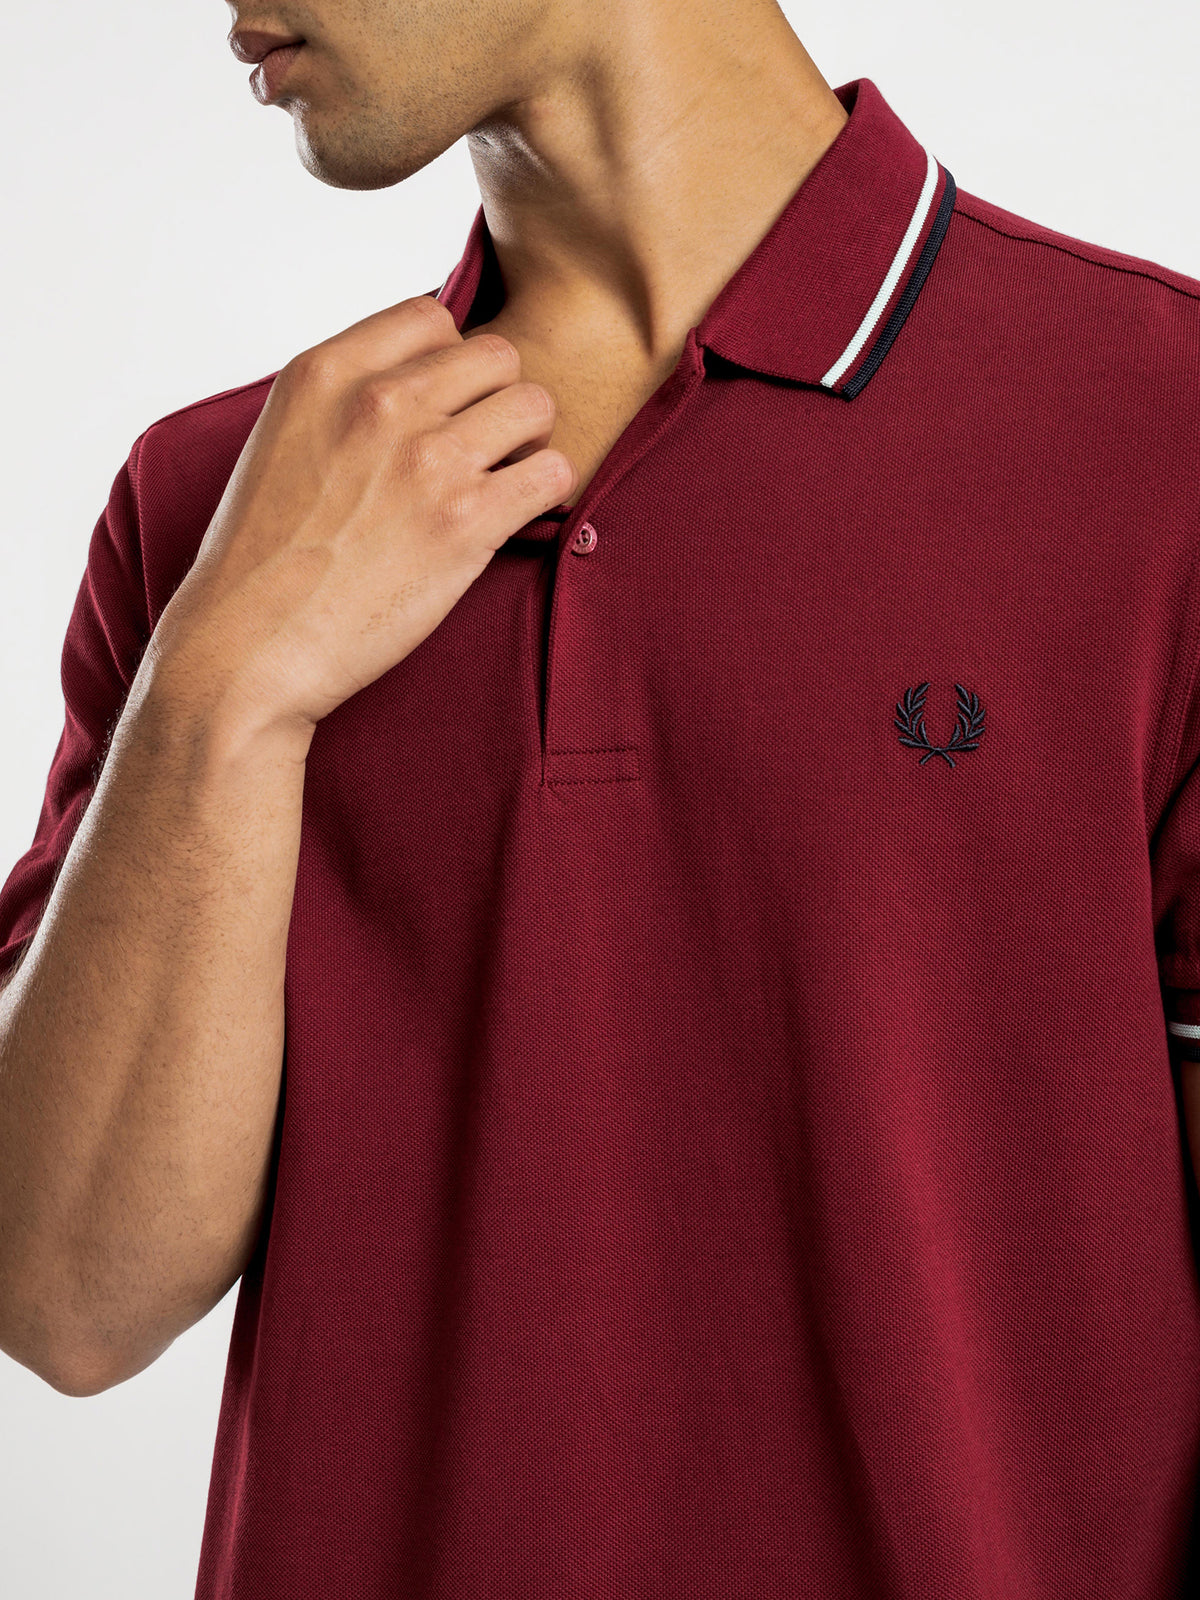 Twin Tripped Fred Perry Shirt in Burgundy